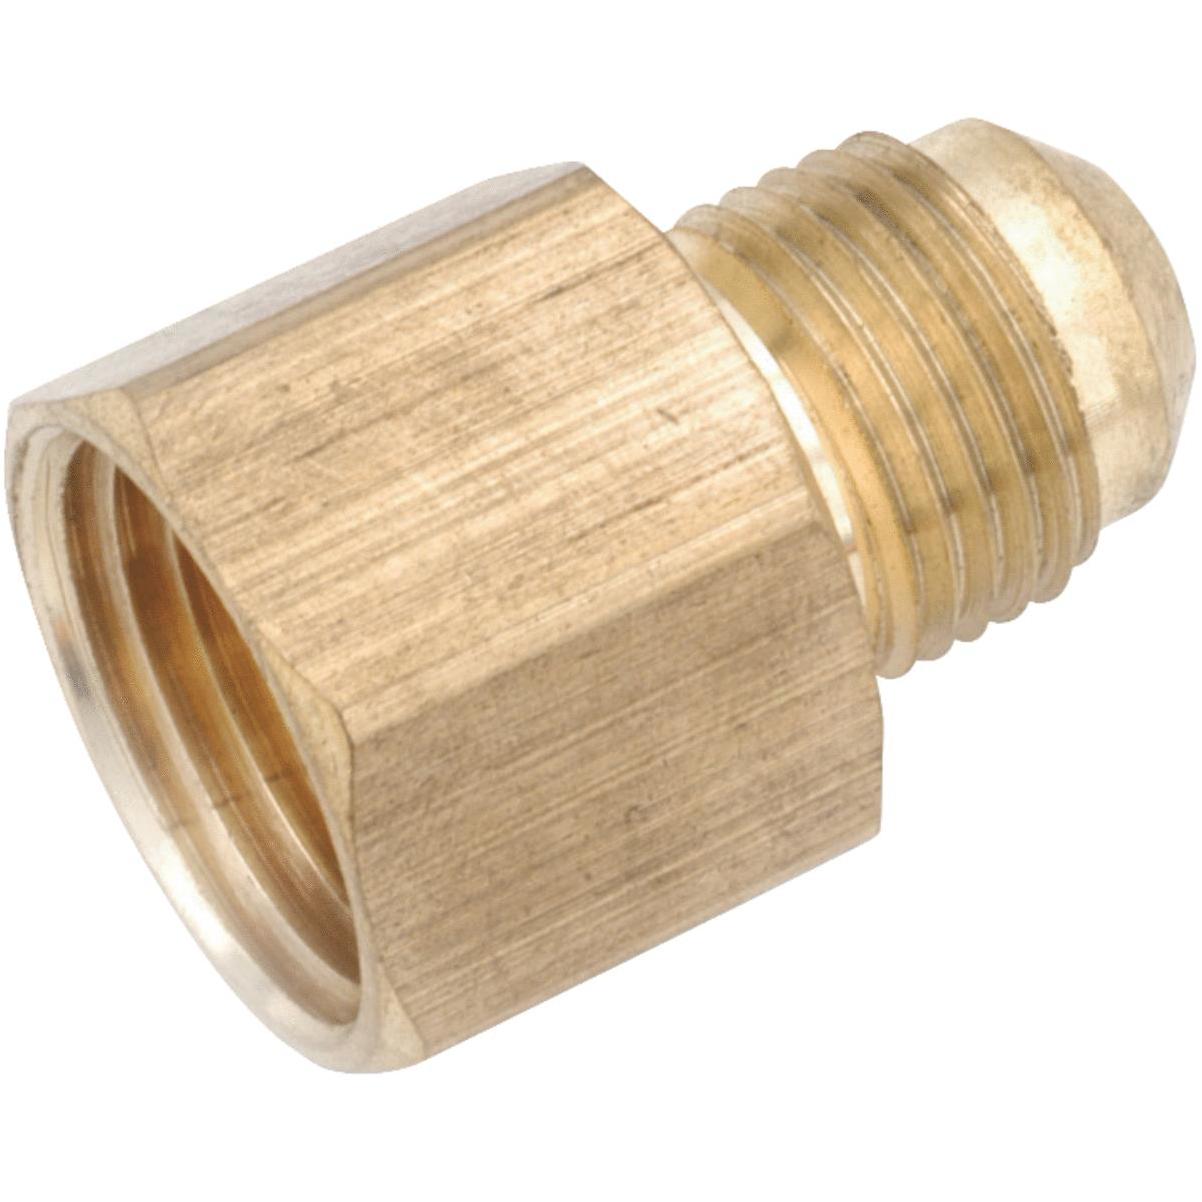 Anderson Metals Brass Tube Fitting, Short Forged Flare Nut, 1/4 Tube OD